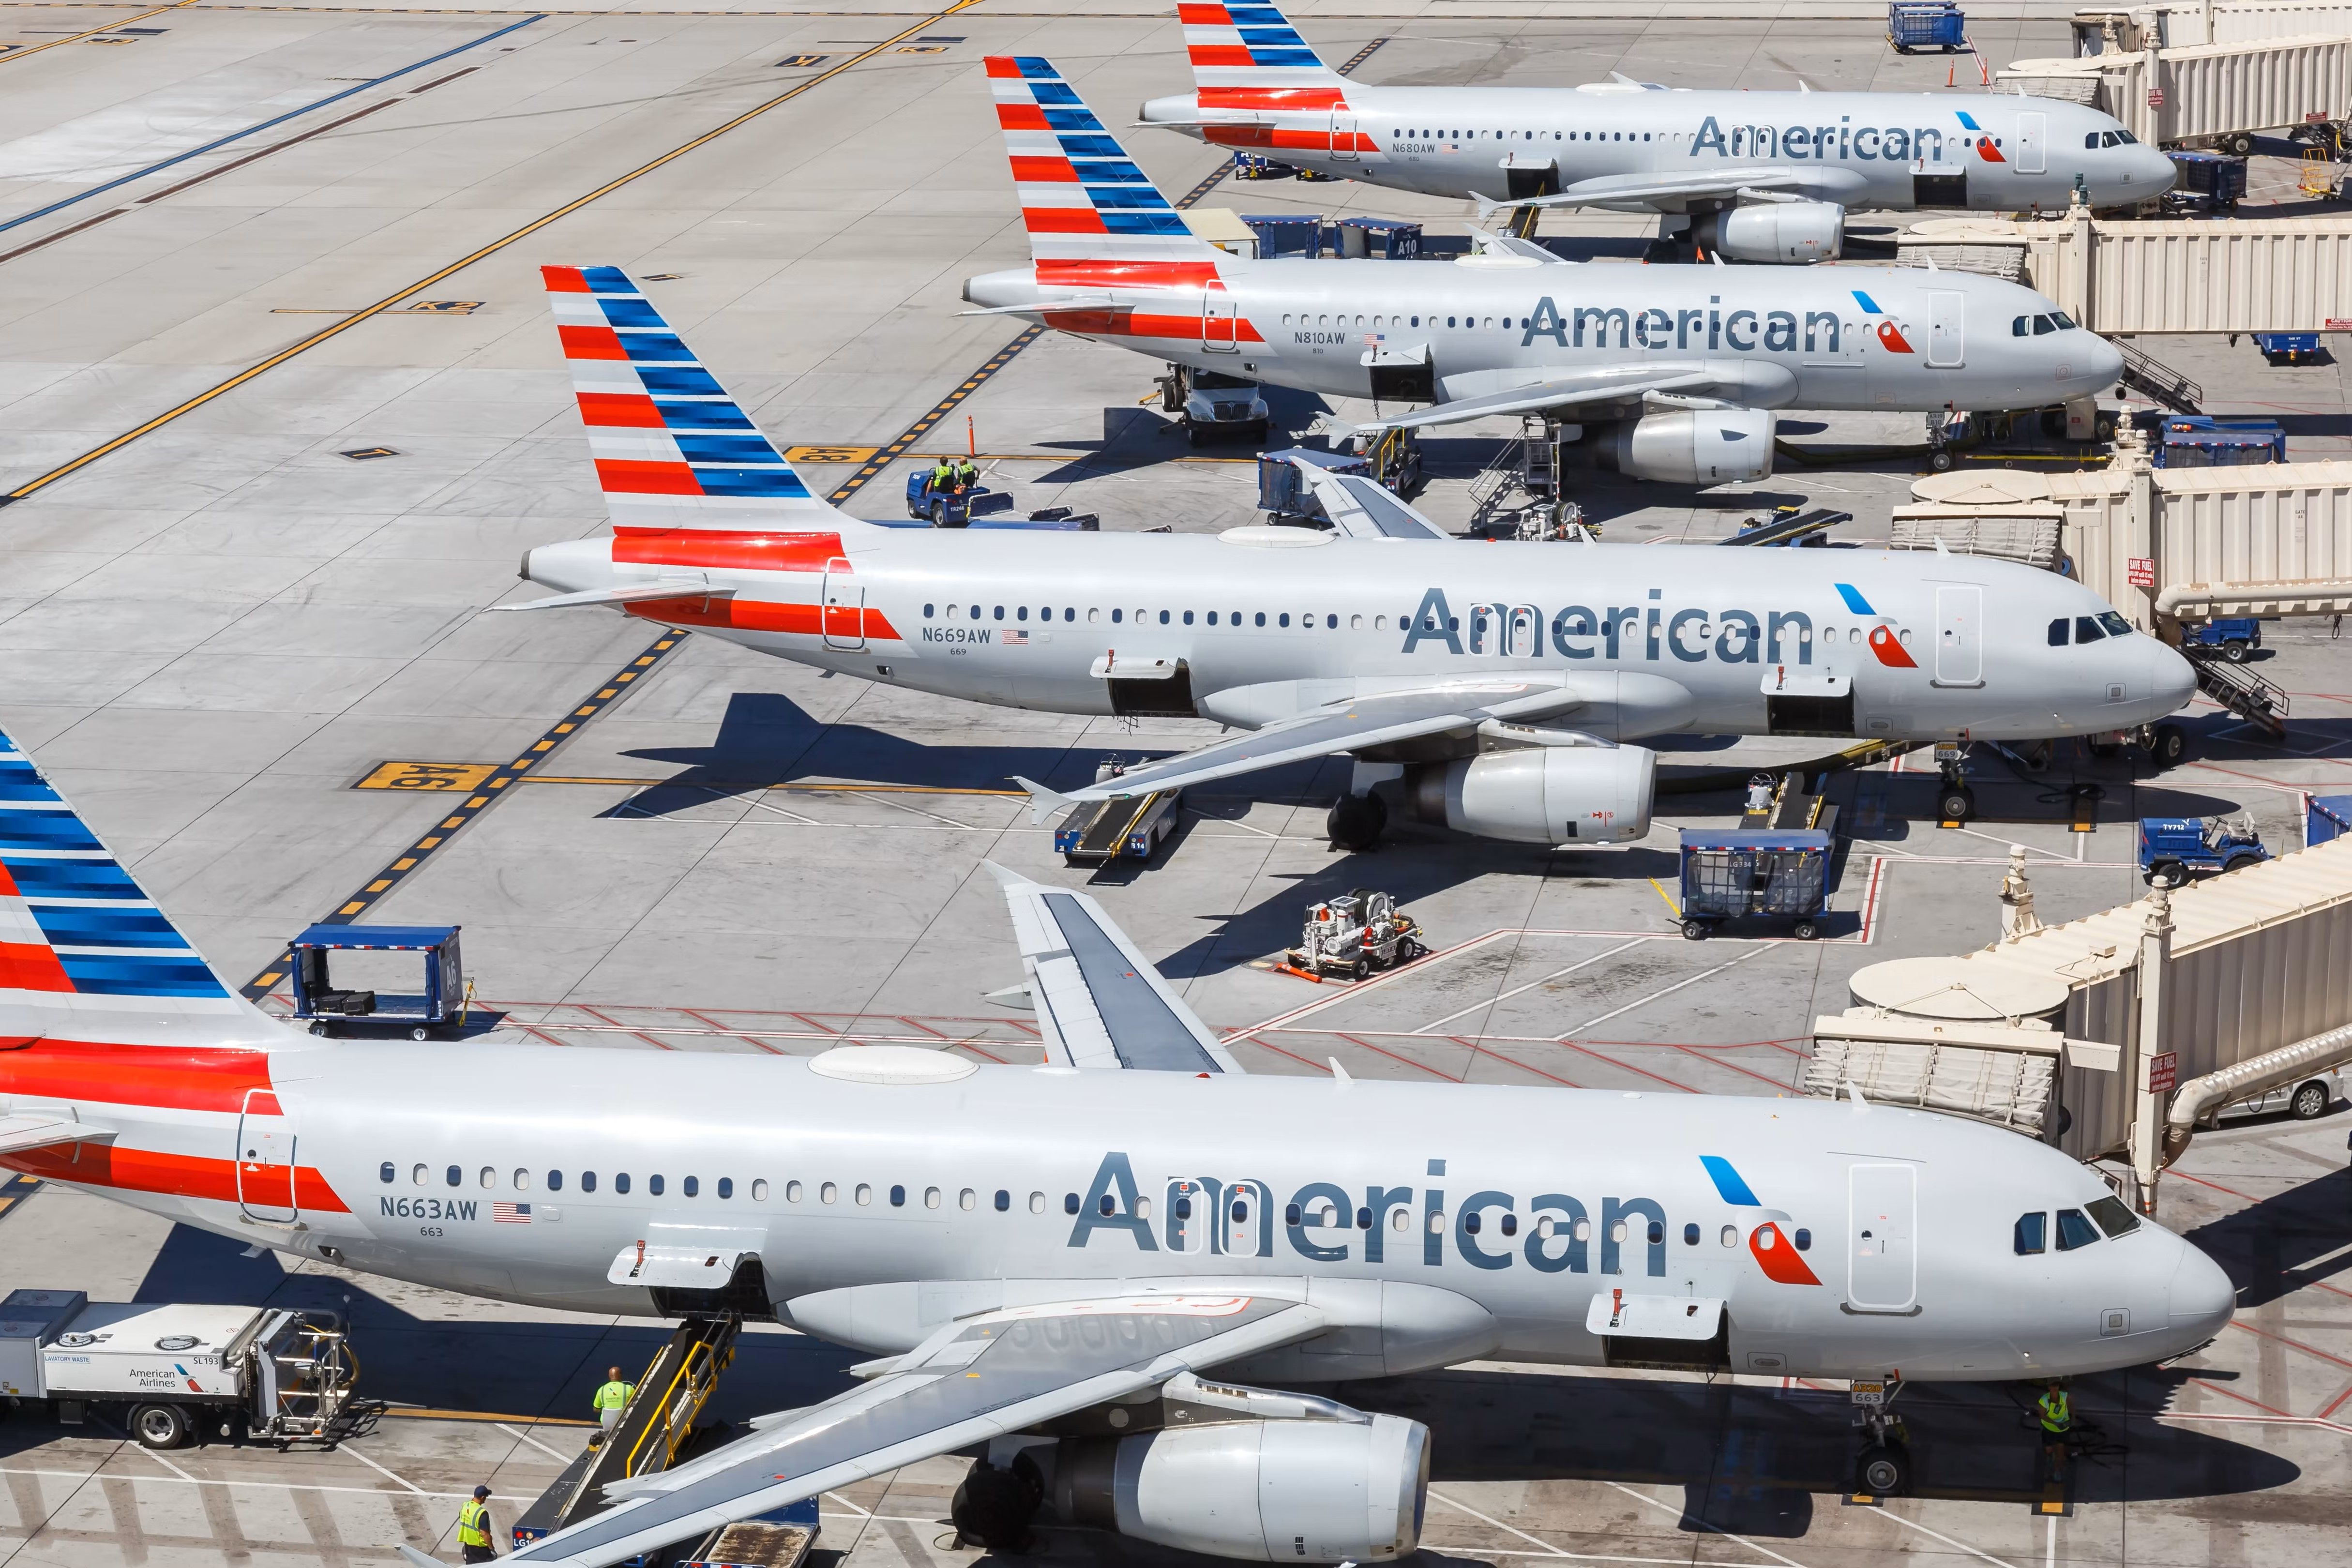 American Airlines Airbus A320 airplanes at Phoenix Sky Harbor airport (PHX) in Arizona. 